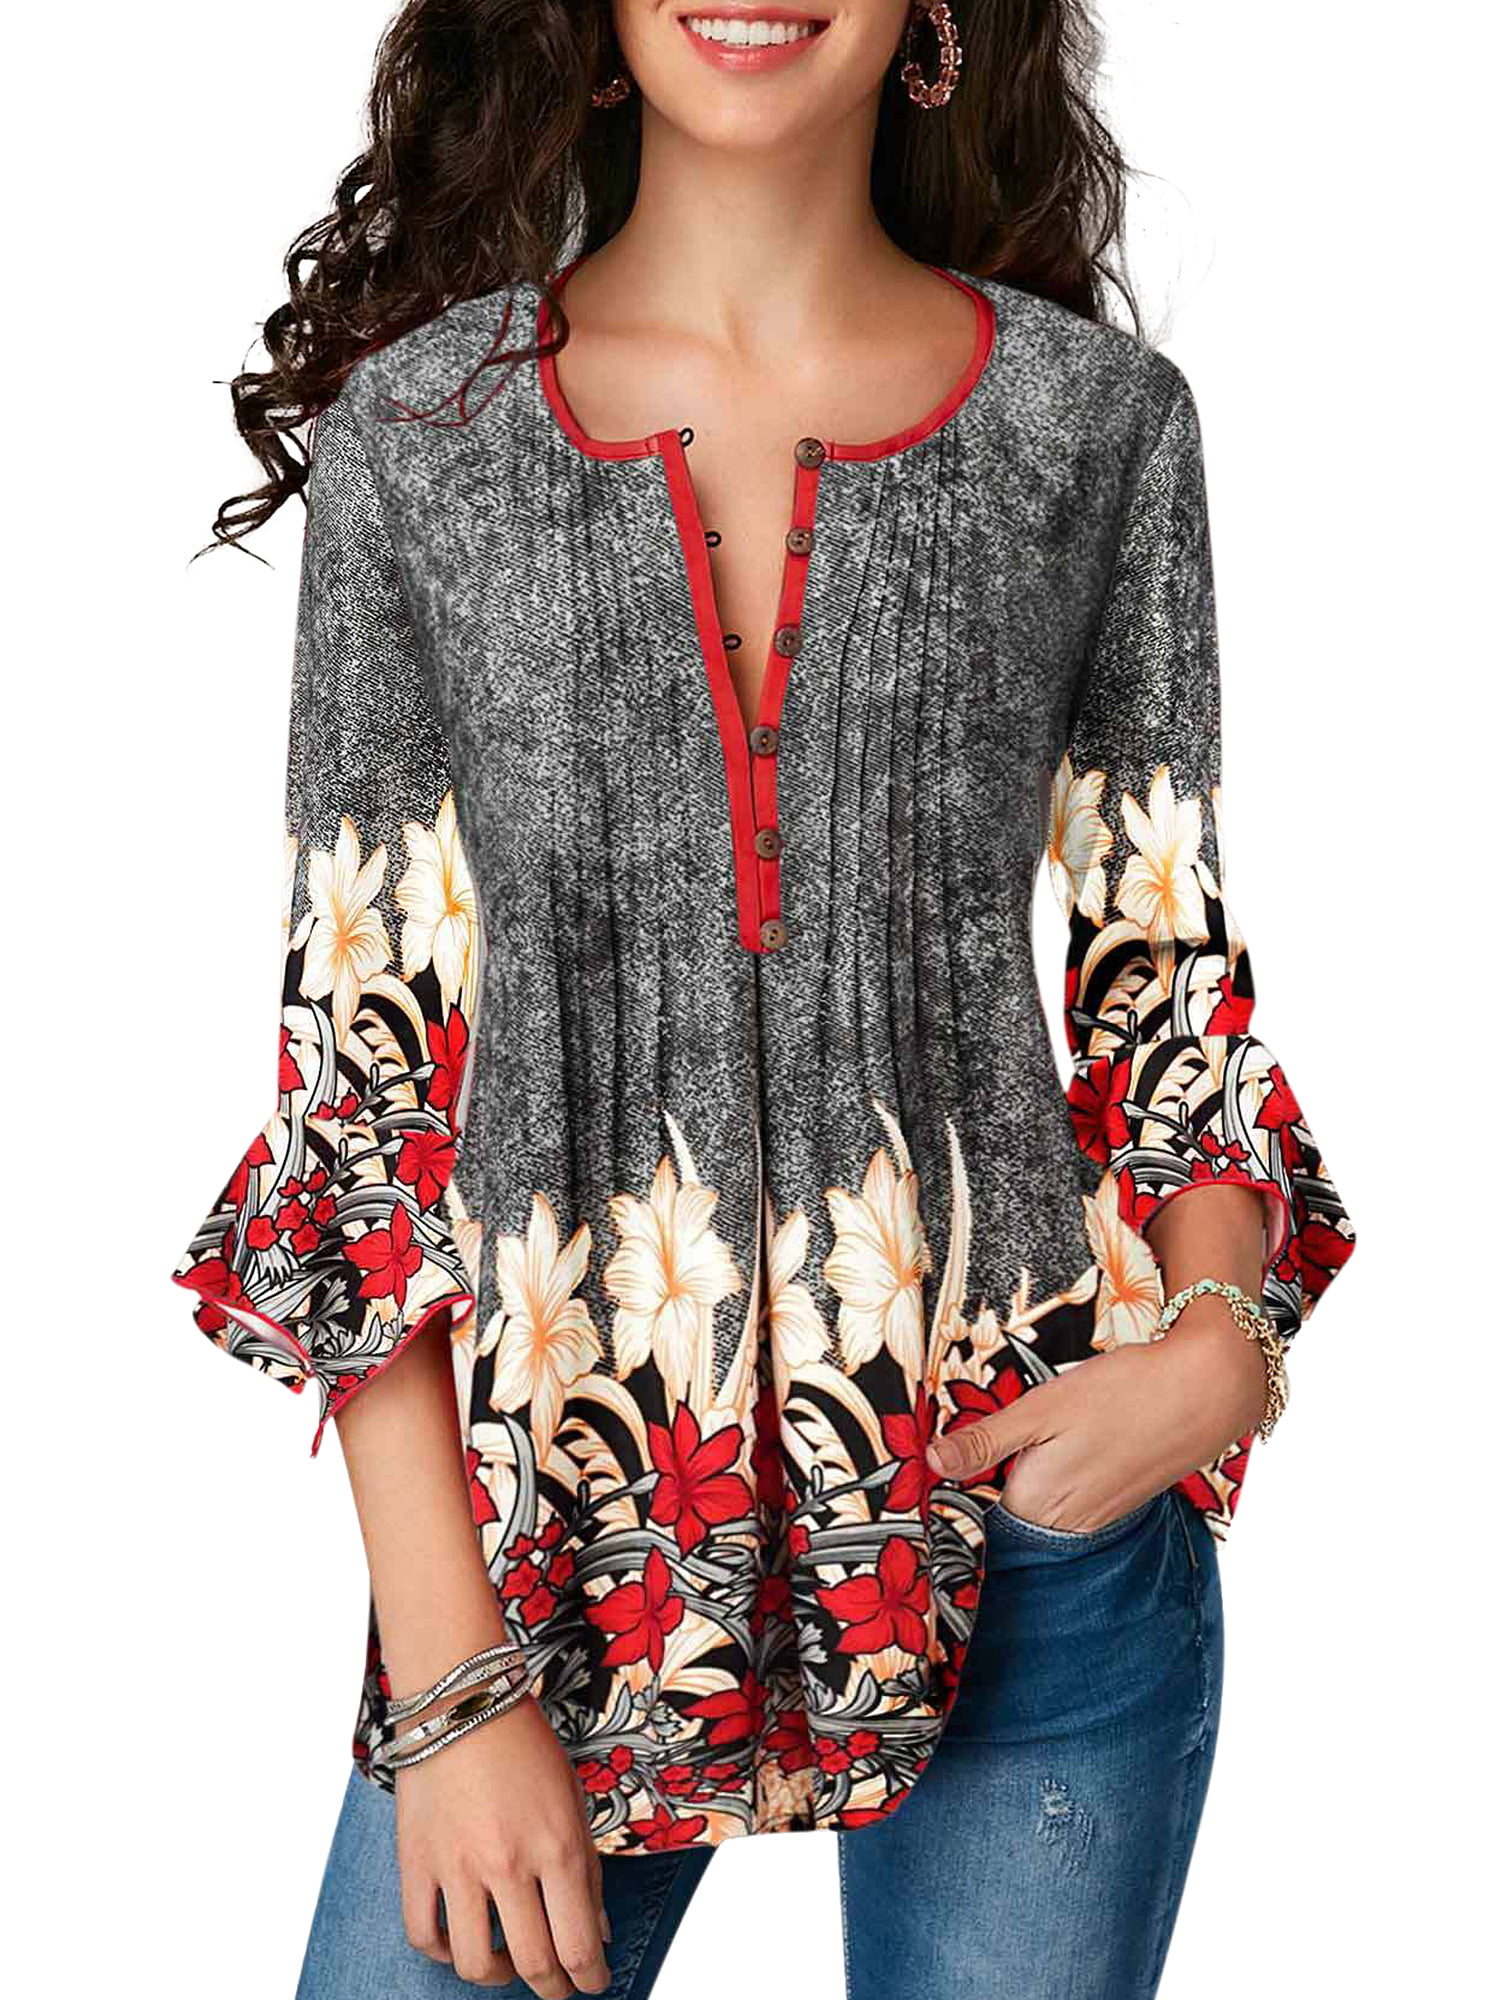 Plus Size Women's Loose Long Sleeve Floral Casual Blouse Shirt Tunic Tops Blouse 